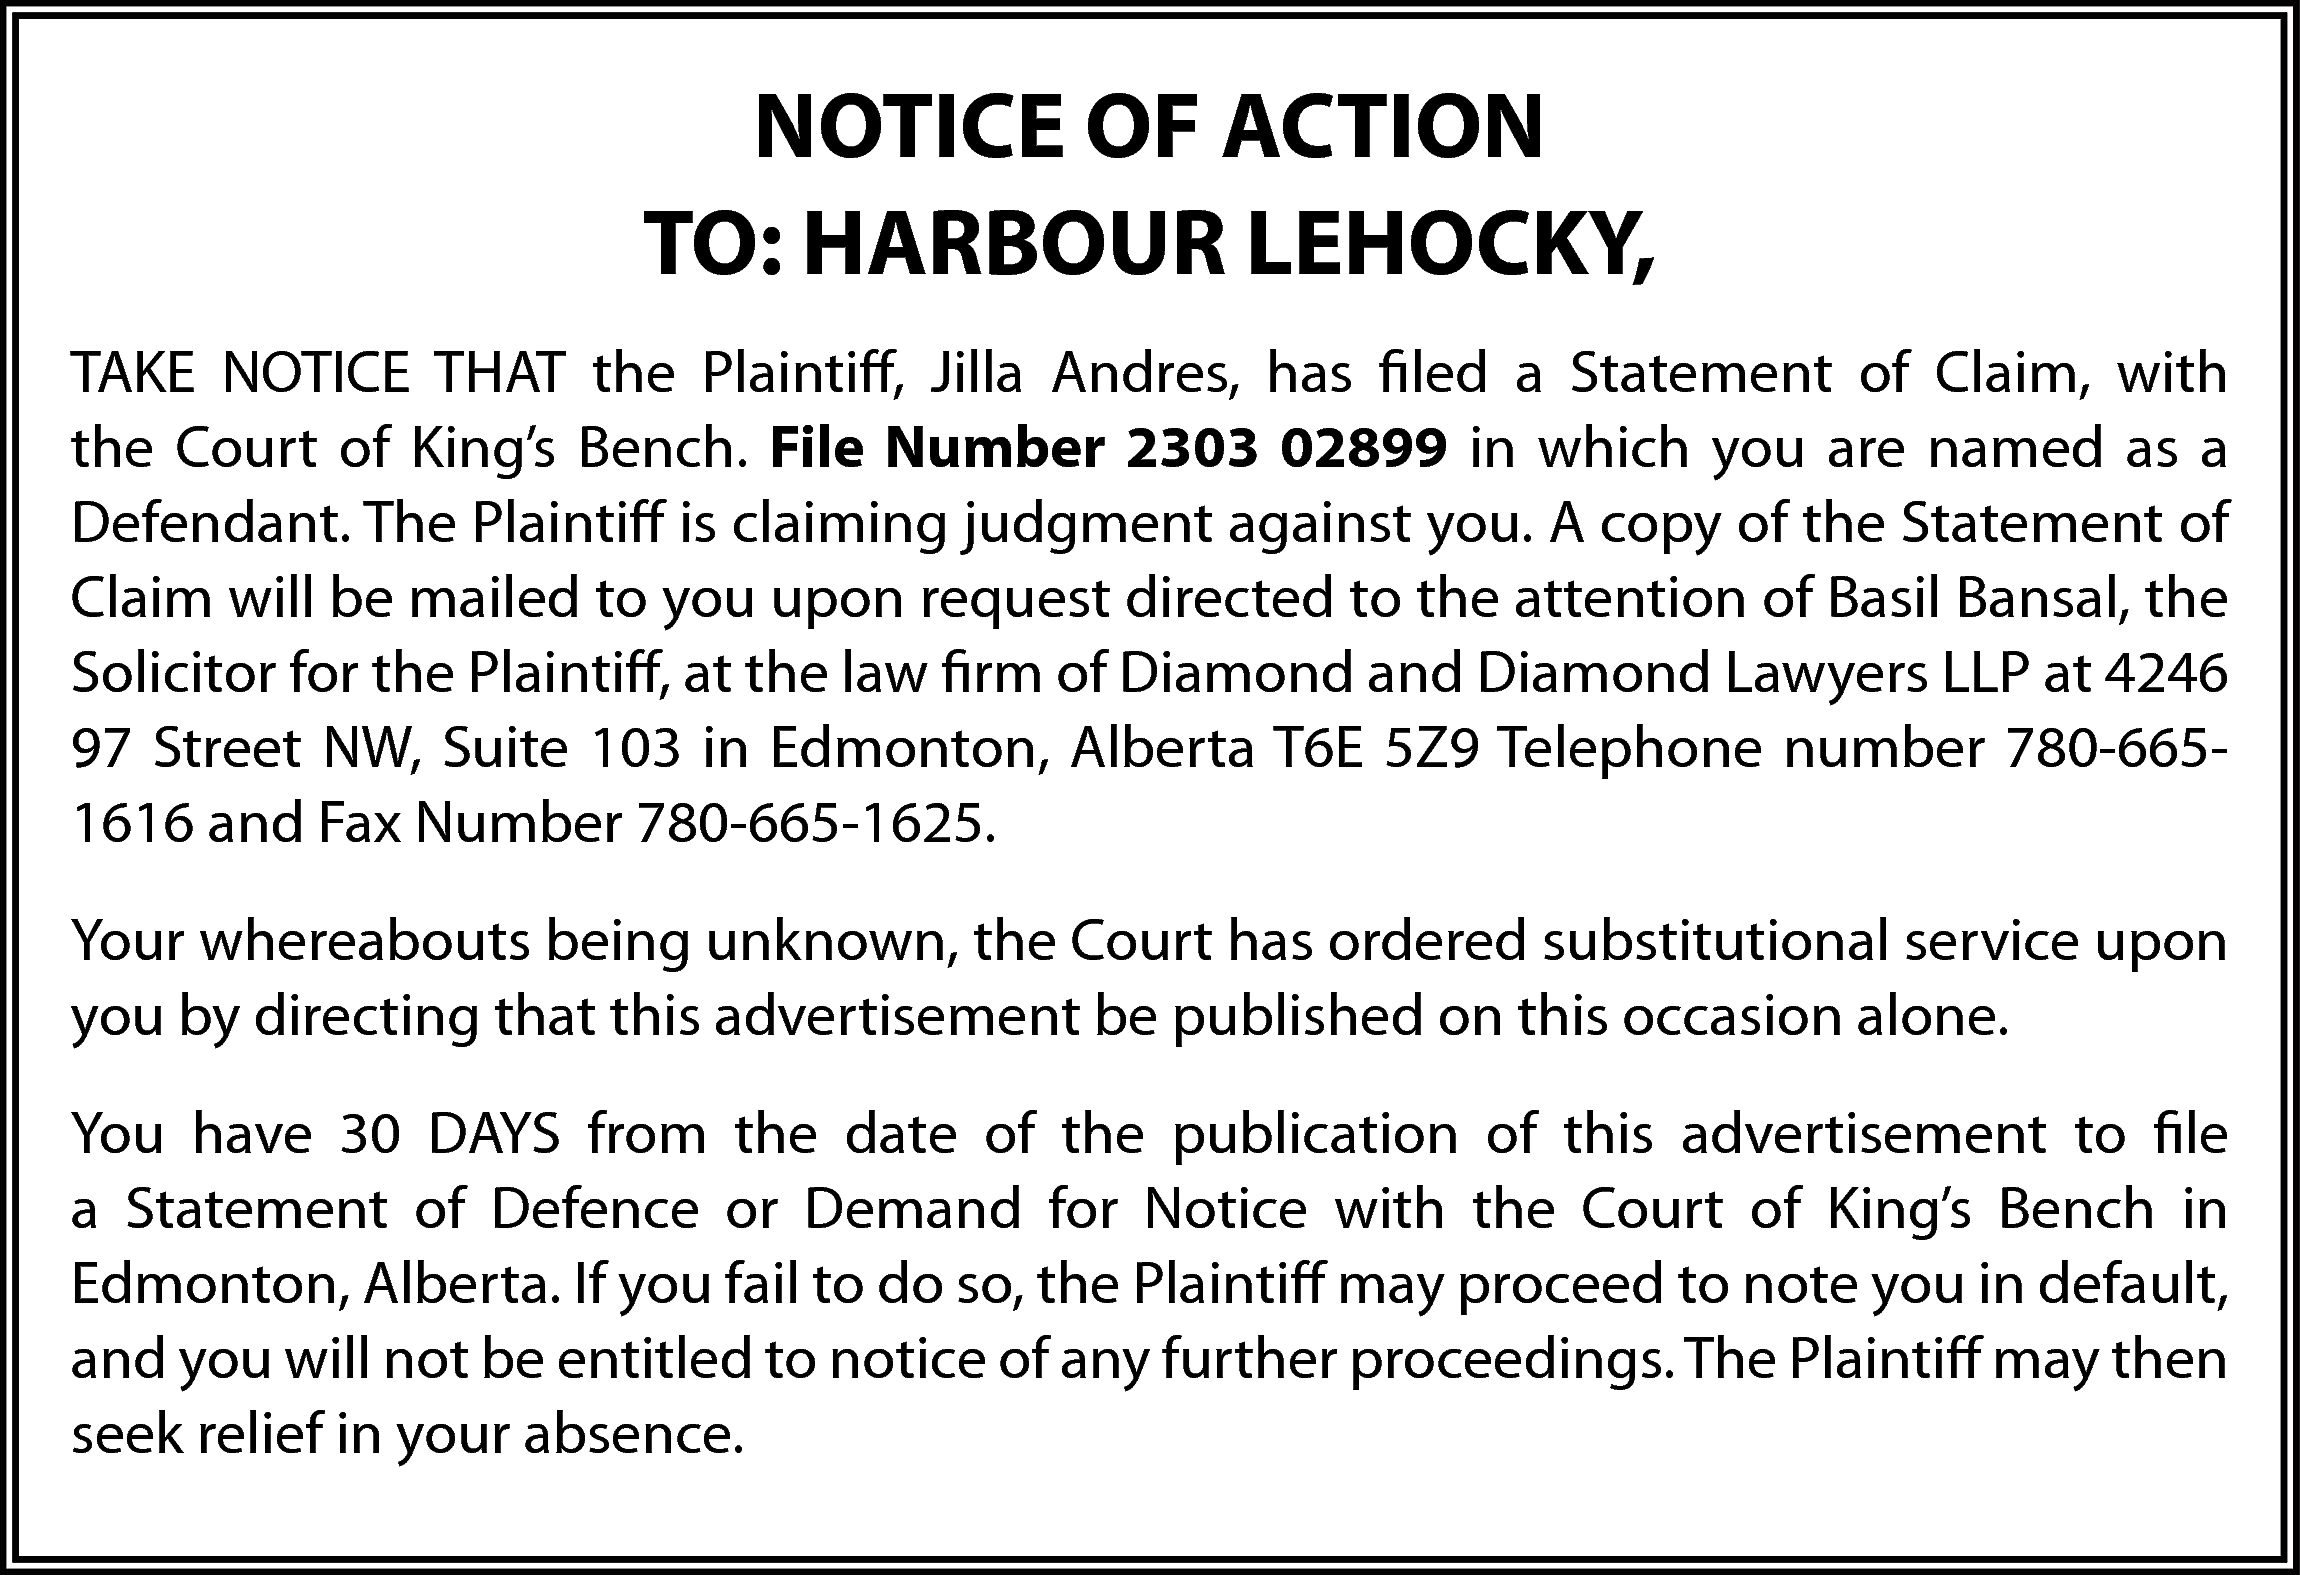 NOTICE OF ACTION <br>TO: HARBOUR  NOTICE OF ACTION  TO: HARBOUR LEHOCKY,  TAKE NOTICE THAT the Plaintiff, Jilla Andres, has filed a Statement of Claim, with  the Court of King’s Bench. File Number 2303 02899 in which you are named as a  Defendant. The Plaintiff is claiming judgment against you. A copy of the Statement of  Claim will be mailed to you upon request directed to the attention of Basil Bansal, the  Solicitor for the Plaintiff, at the law firm of Diamond and Diamond Lawyers LLP at 4246  97 Street NW, Suite 103 in Edmonton, Alberta T6E 5Z9 Telephone number 780-6651616 and Fax Number 780-665-1625.  Your whereabouts being unknown, the Court has ordered substitutional service upon  you by directing that this advertisement be published on this occasion alone.  You have 30 DAYS from the date of the publication of this advertisement to file  a Statement of Defence or Demand for Notice with the Court of King’s Bench in  Edmonton, Alberta. If you fail to do so, the Plaintiff may proceed to note you in default,  and you will not be entitled to notice of any further proceedings. The Plaintiff may then  seek relief in your absence.    